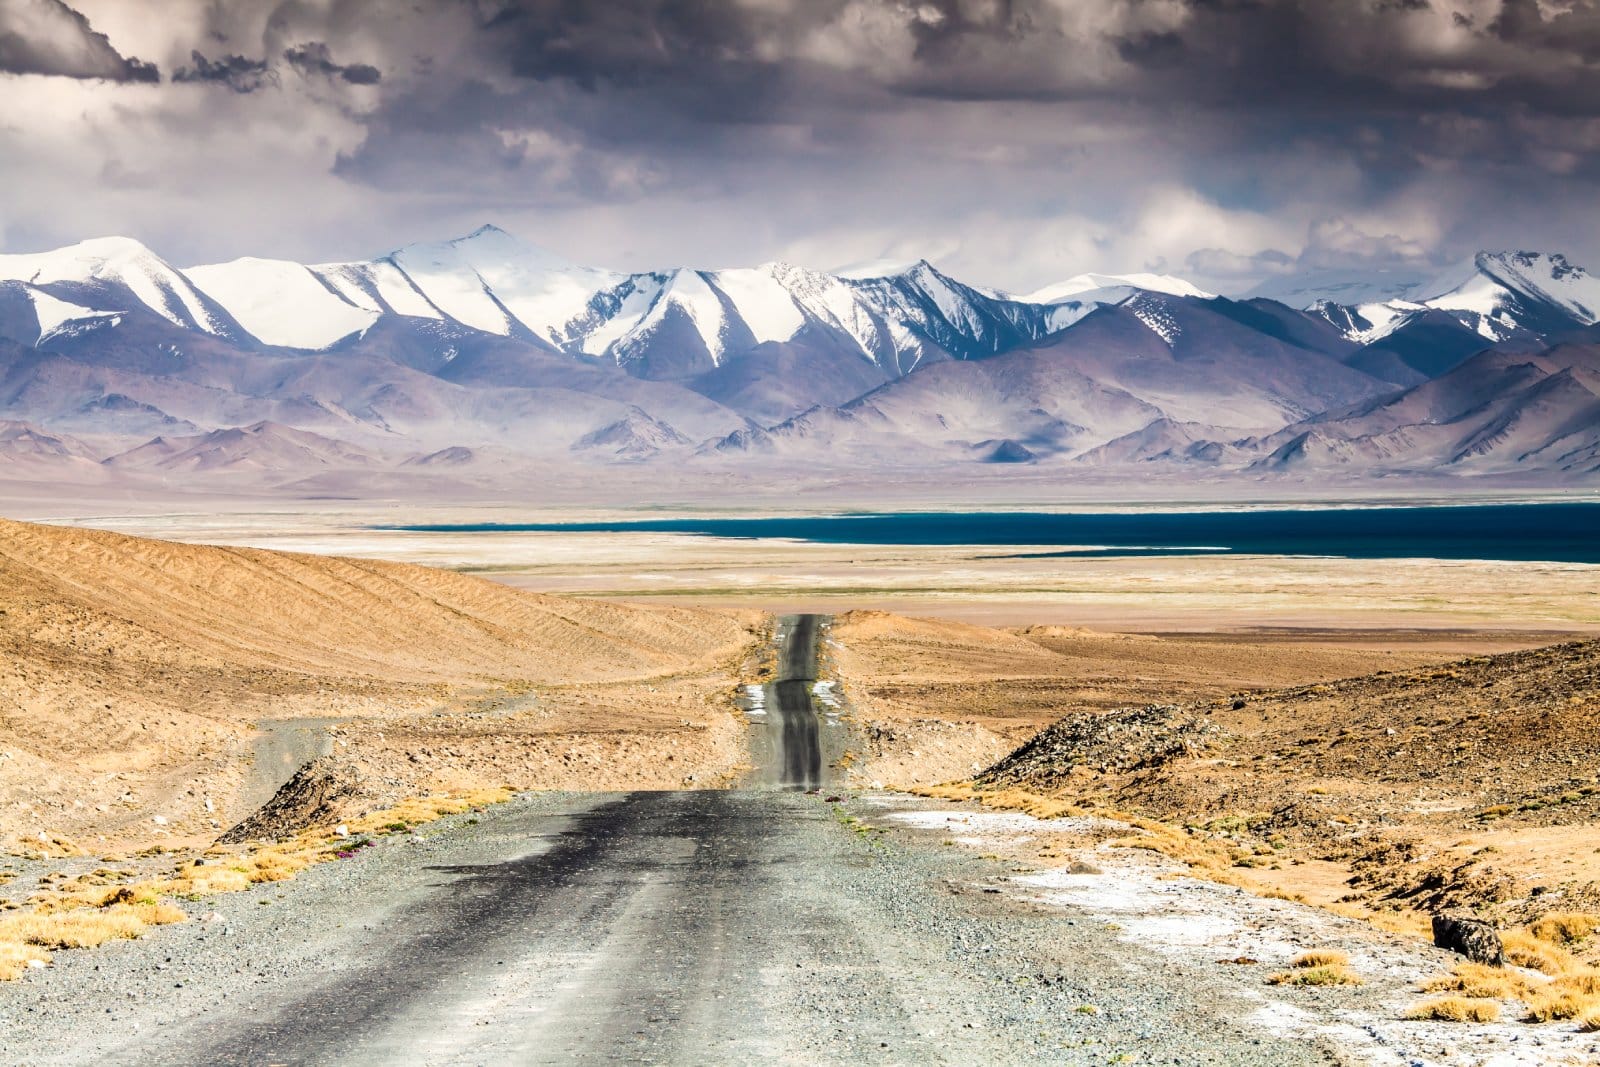 <p class="wp-caption-text">Image Credit: Shutterstock / NOWAK LUKASZ</p>  <p><span>Traverse the rugged landscapes of Central Asia on the Pamir Highway, a route that’s as much about the journey as the destination. It’s a true adventure for the intrepid traveler.</span></p>